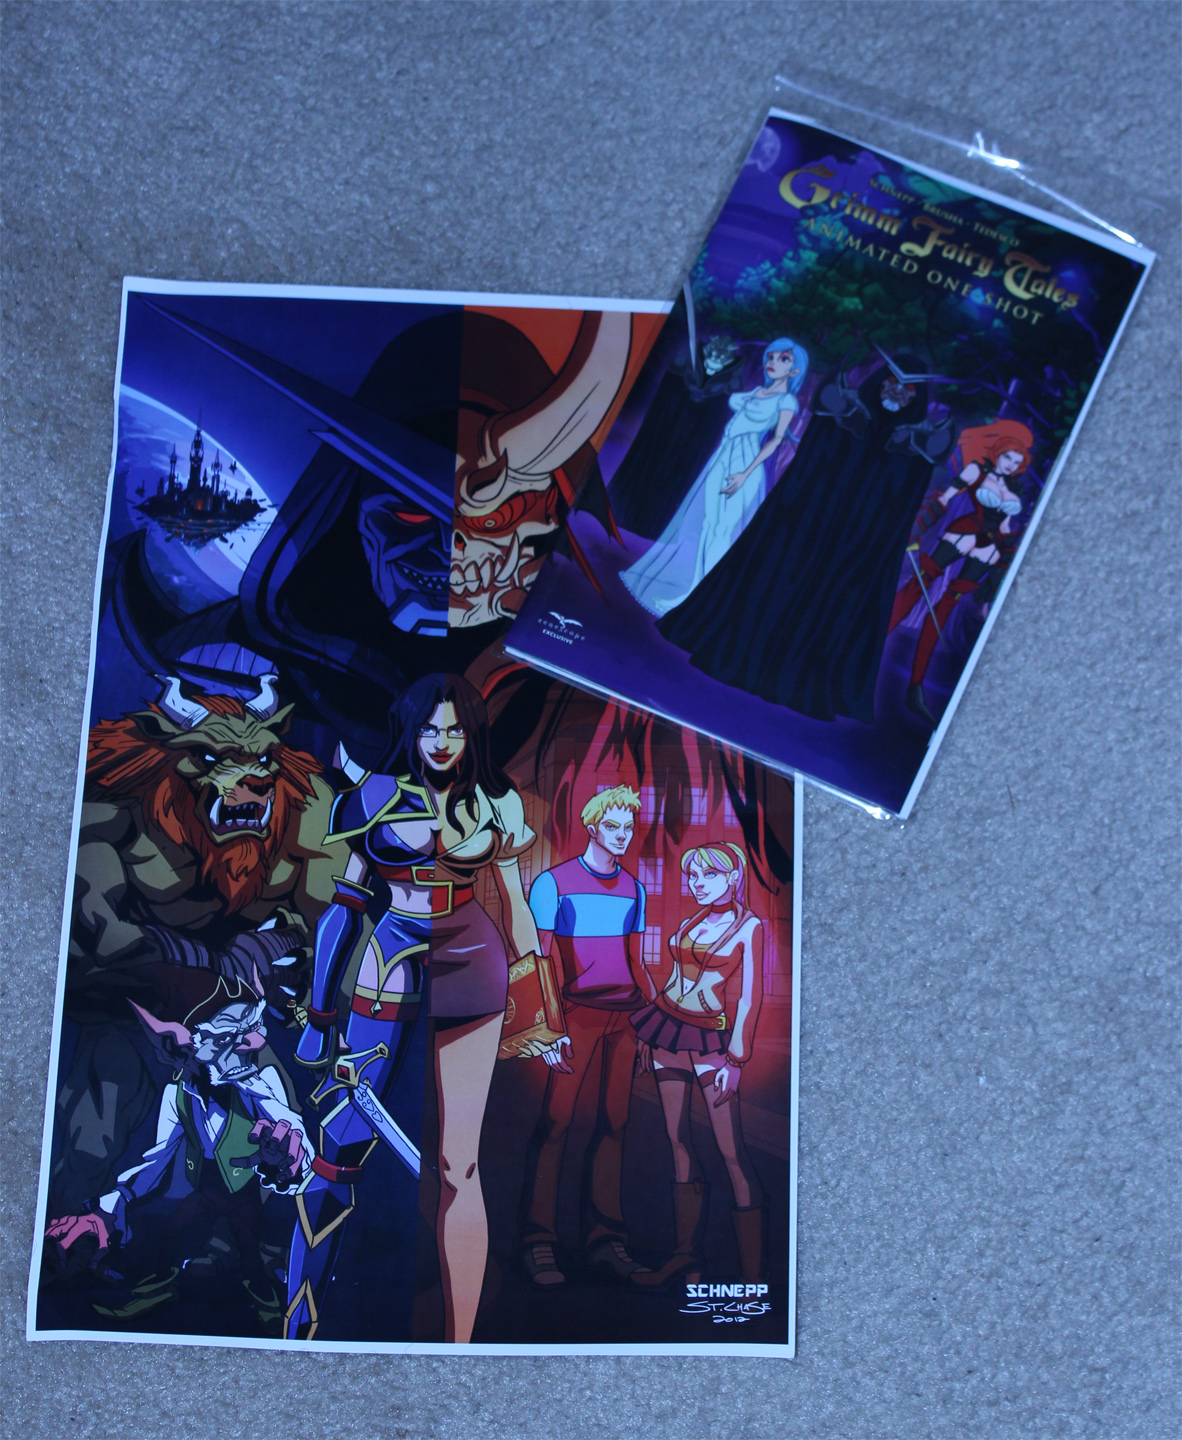 Print and Comic for Grimm Fairy Tales Animated Series